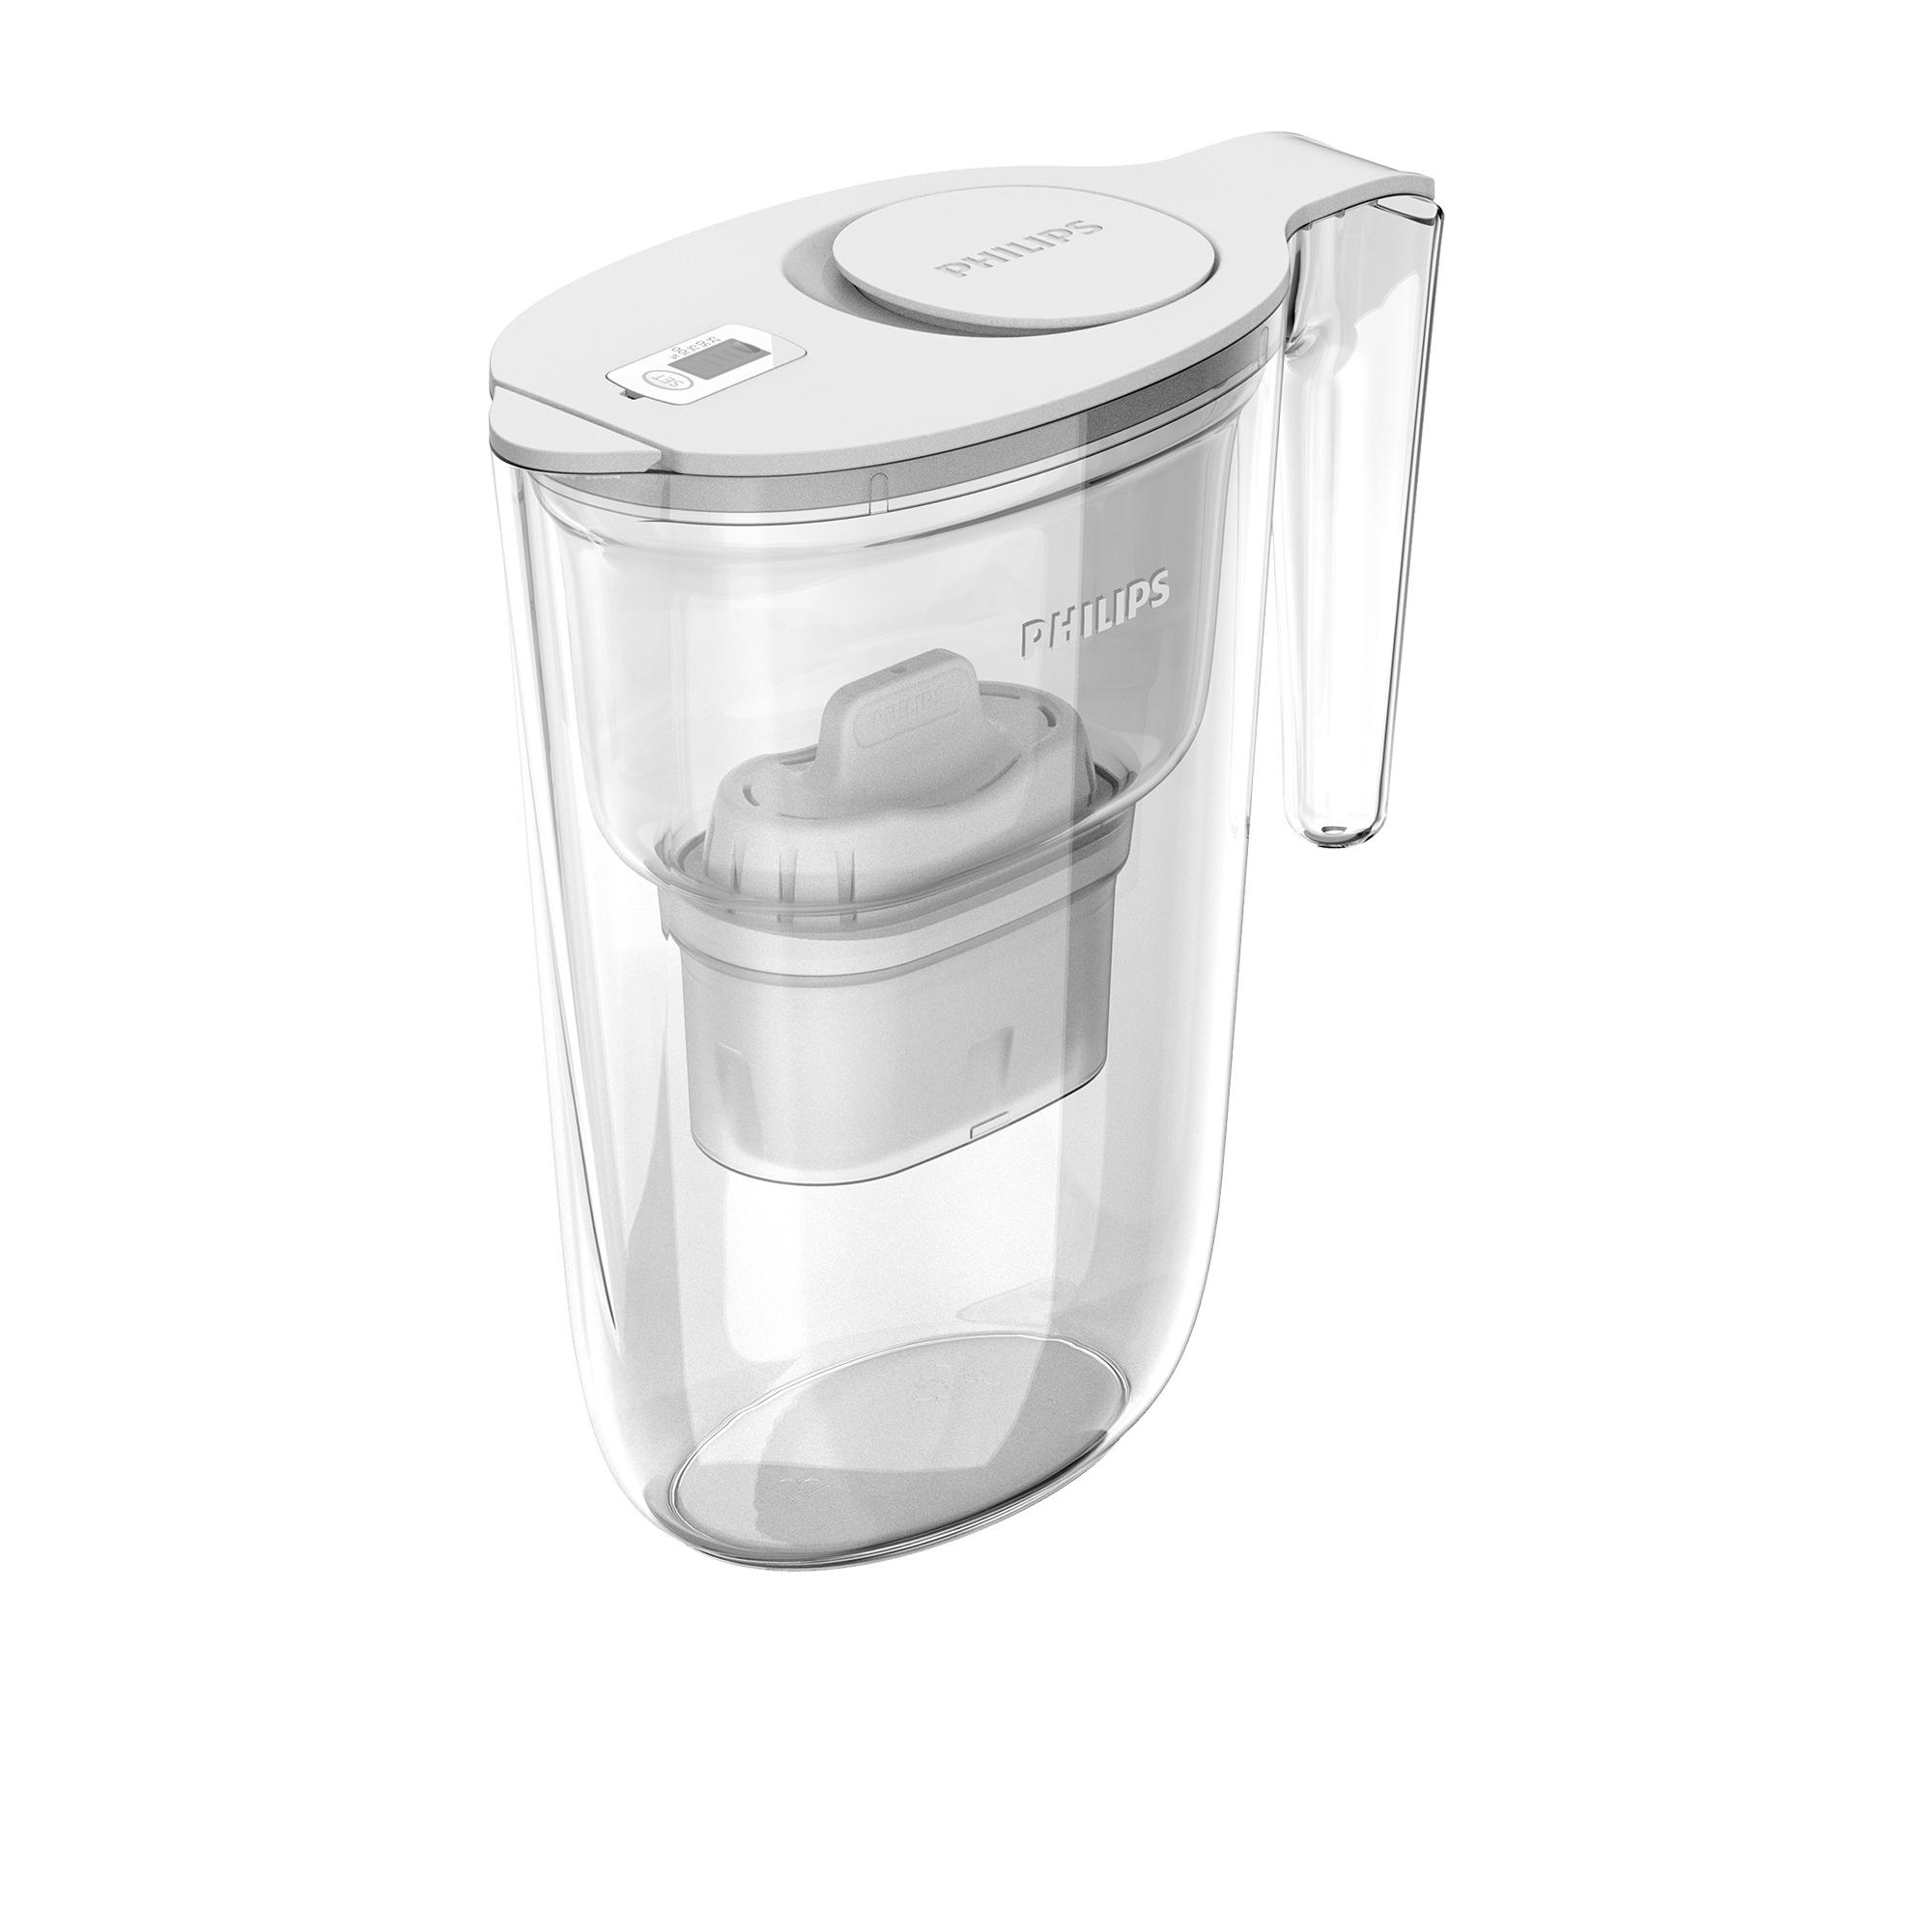 Philips Water Jug with Filter 2.6L White Image 6